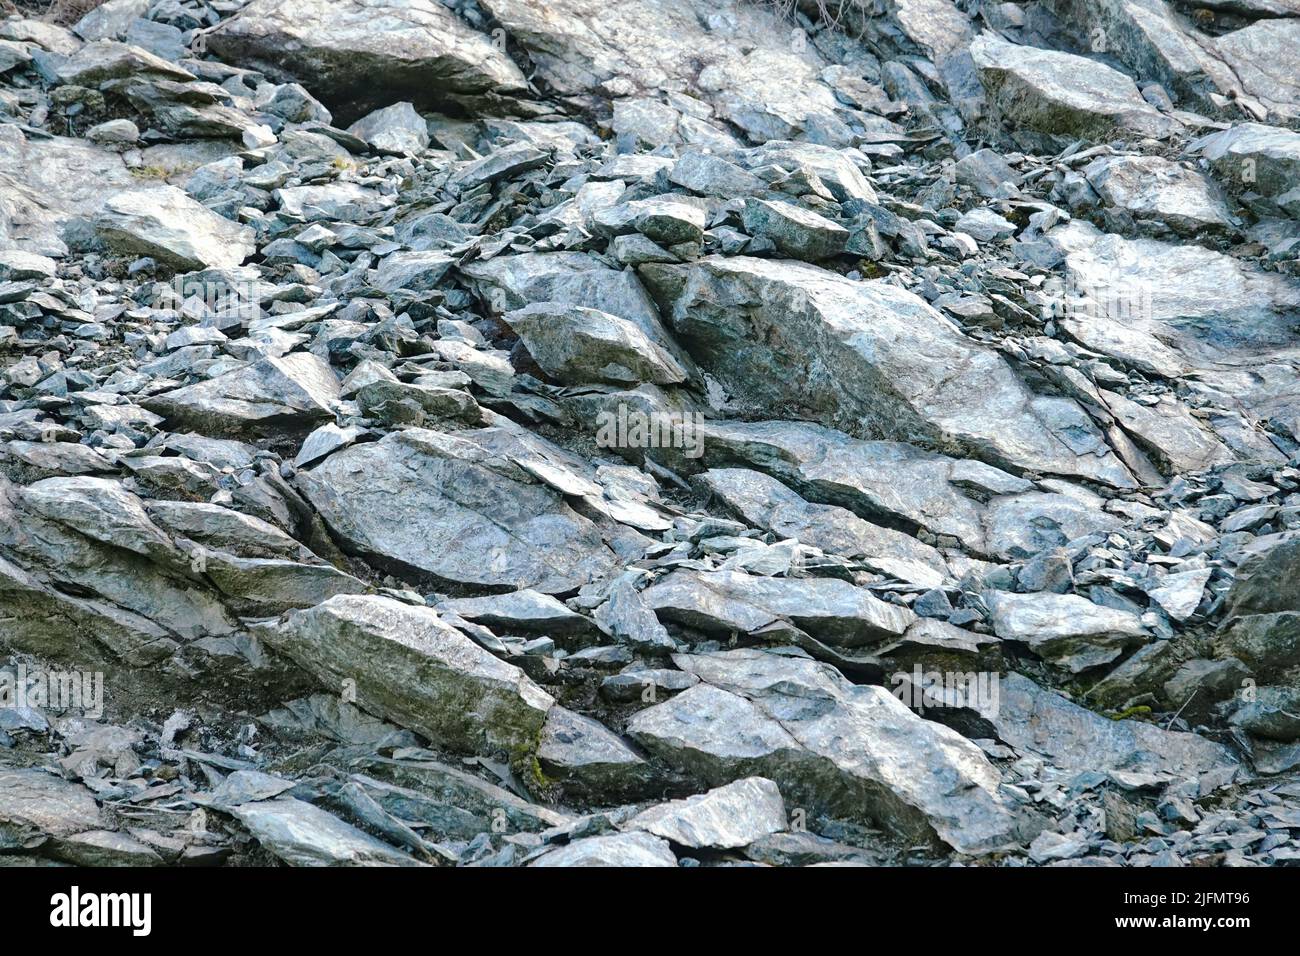 View of Europe's largest asbestos mine, was active until 1990. Stock Photo